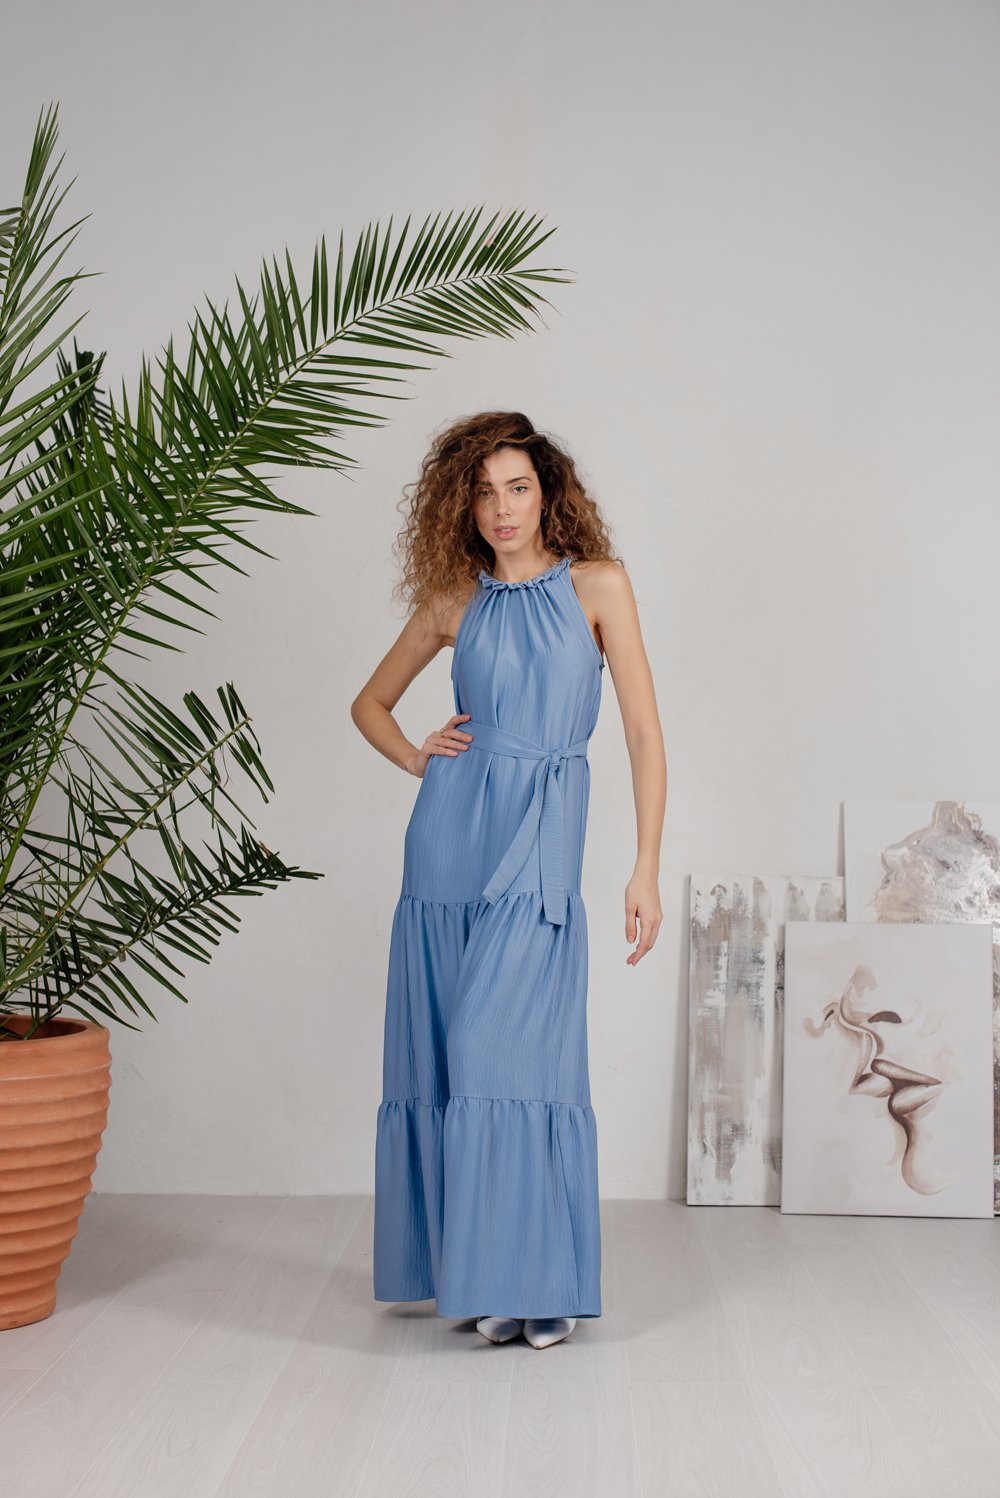 Blue tiered floor-length dress with ties